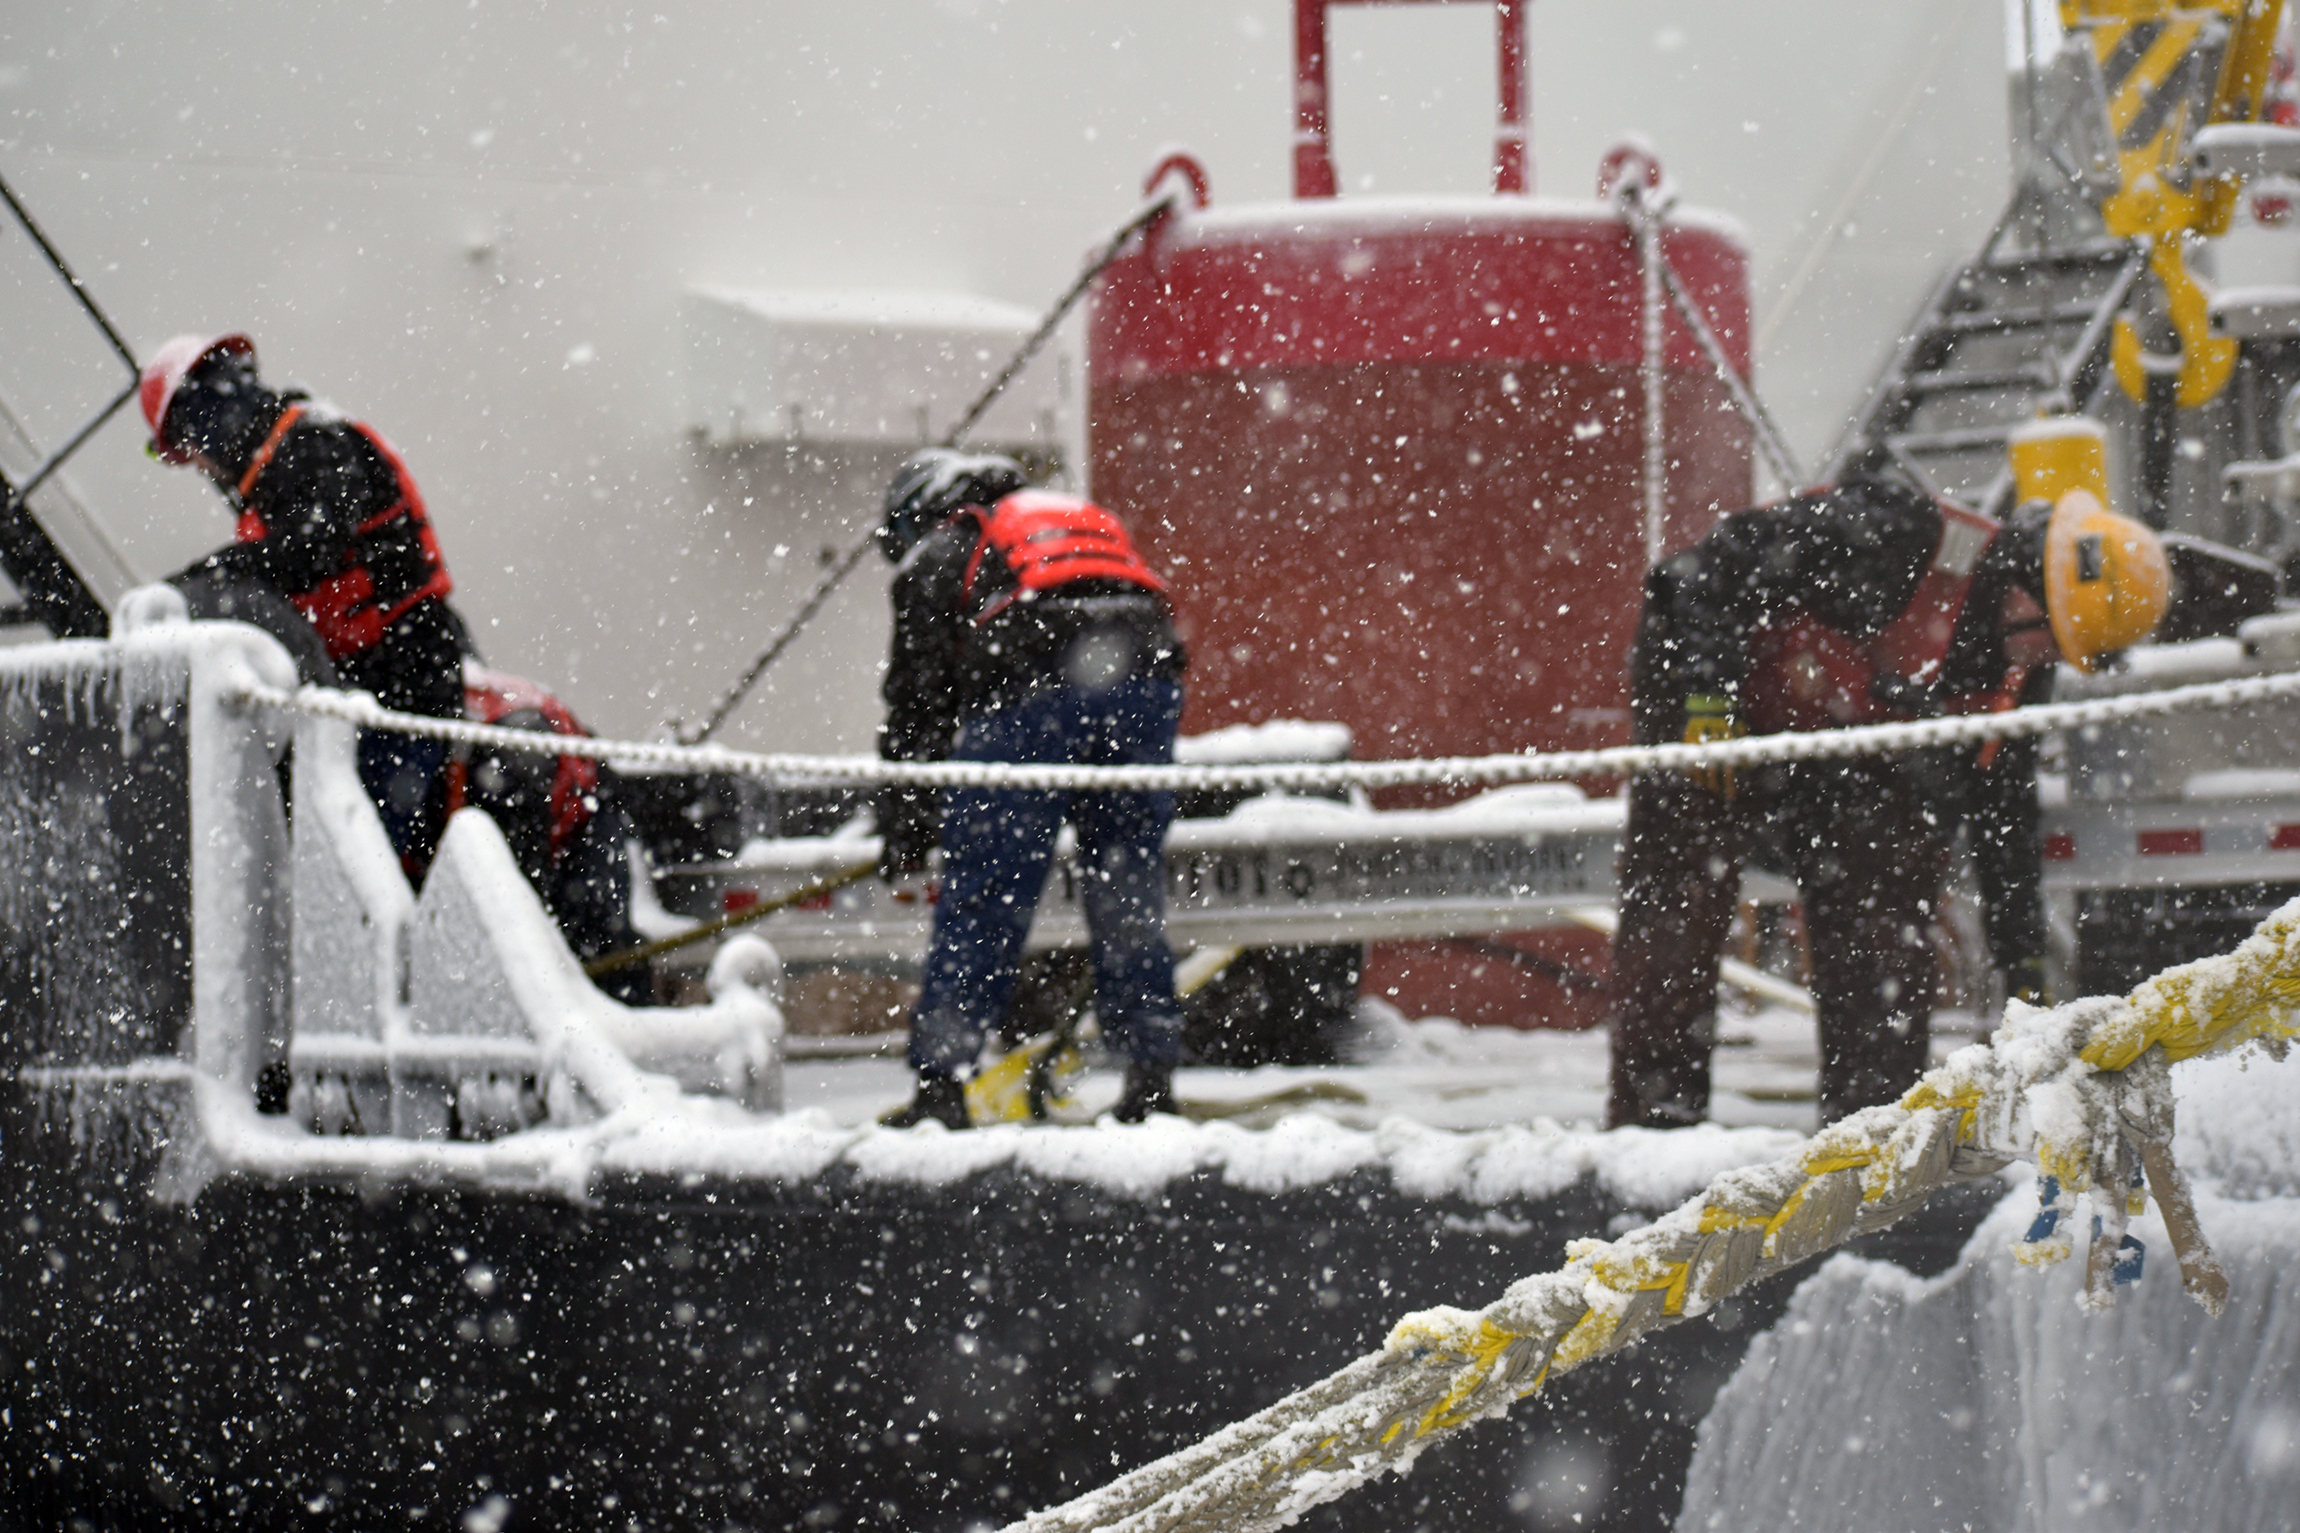 Crew working on the Coast Guard cutter Spar